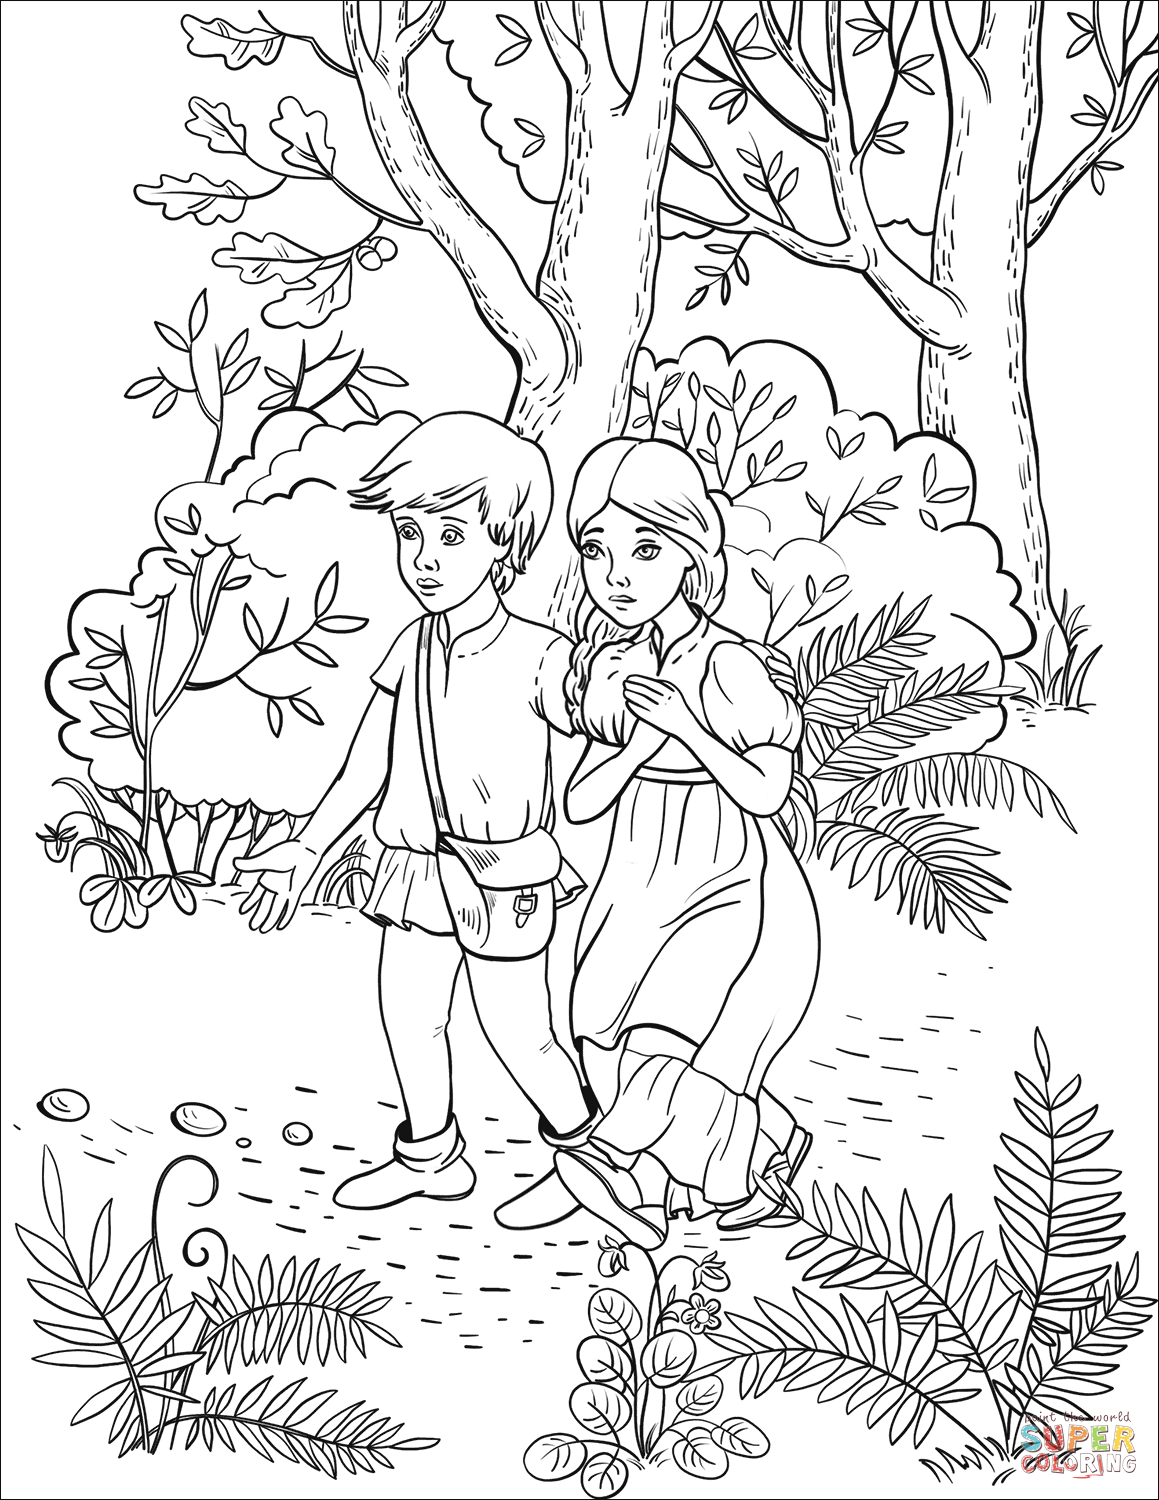 Hansel With His Sister Follow The Pebbles In The Forest avec Coloriage Hansel Et Gretel 